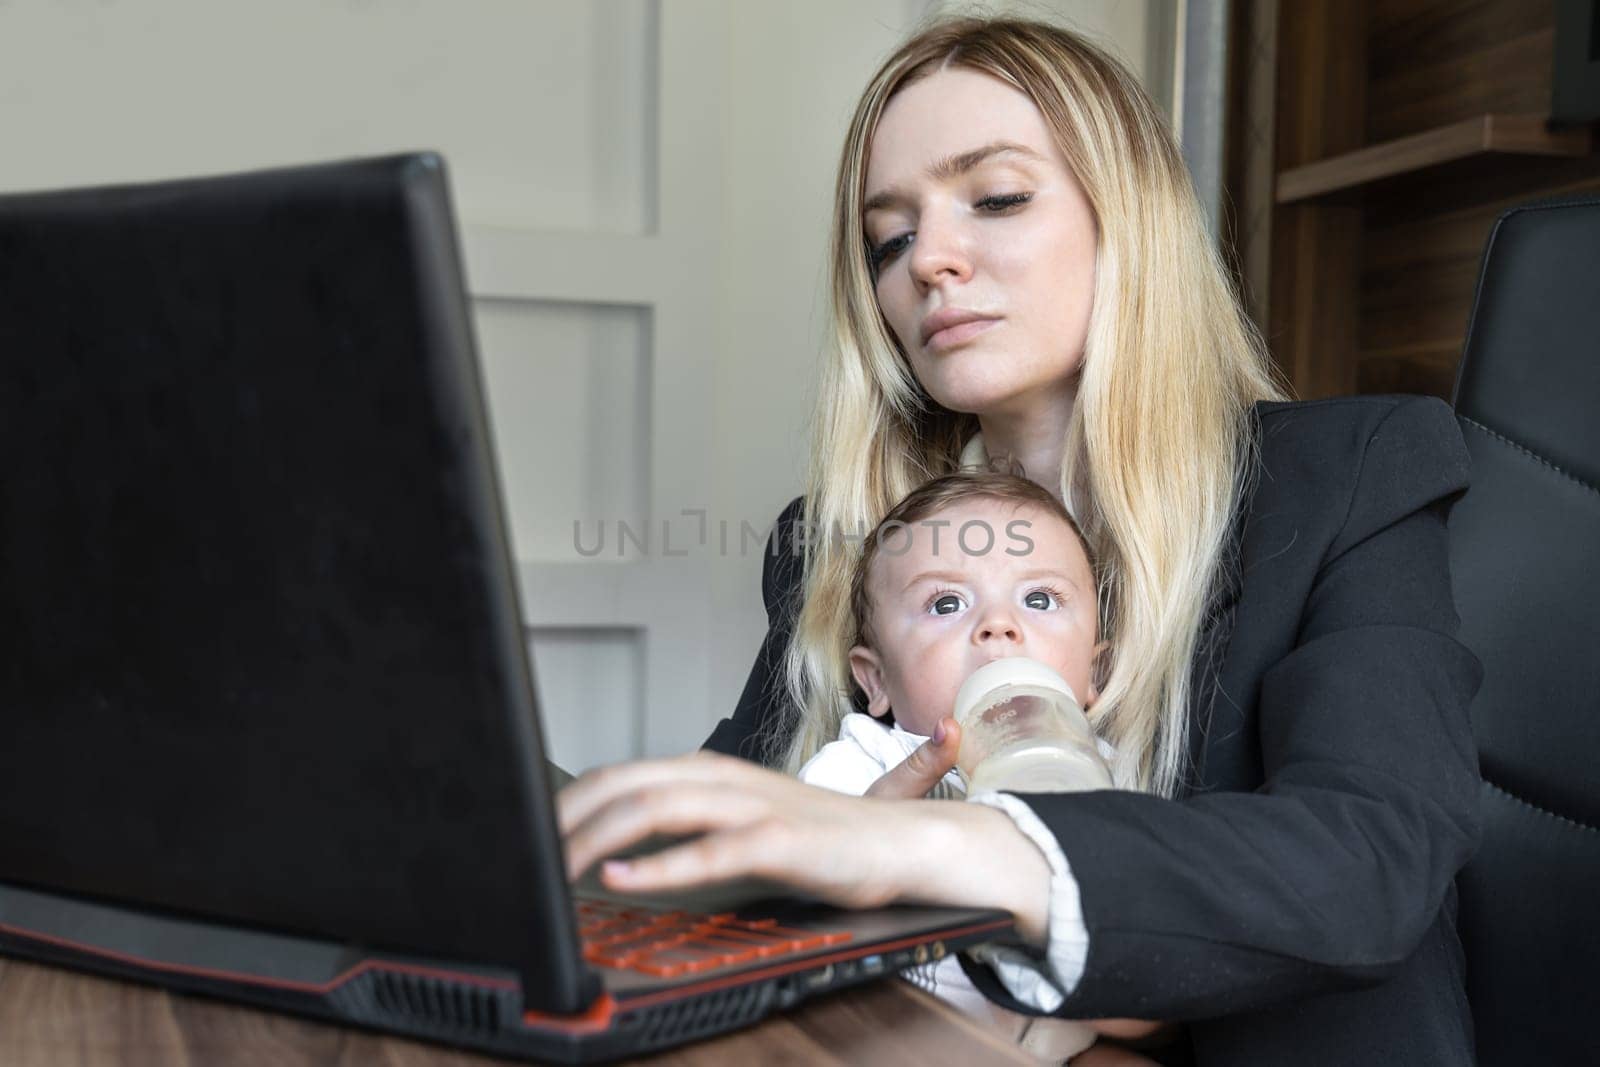 Concept of combining business and caring for a newborn child, young business woman feeds a baby from bottle in office, combining it with work on laptop.